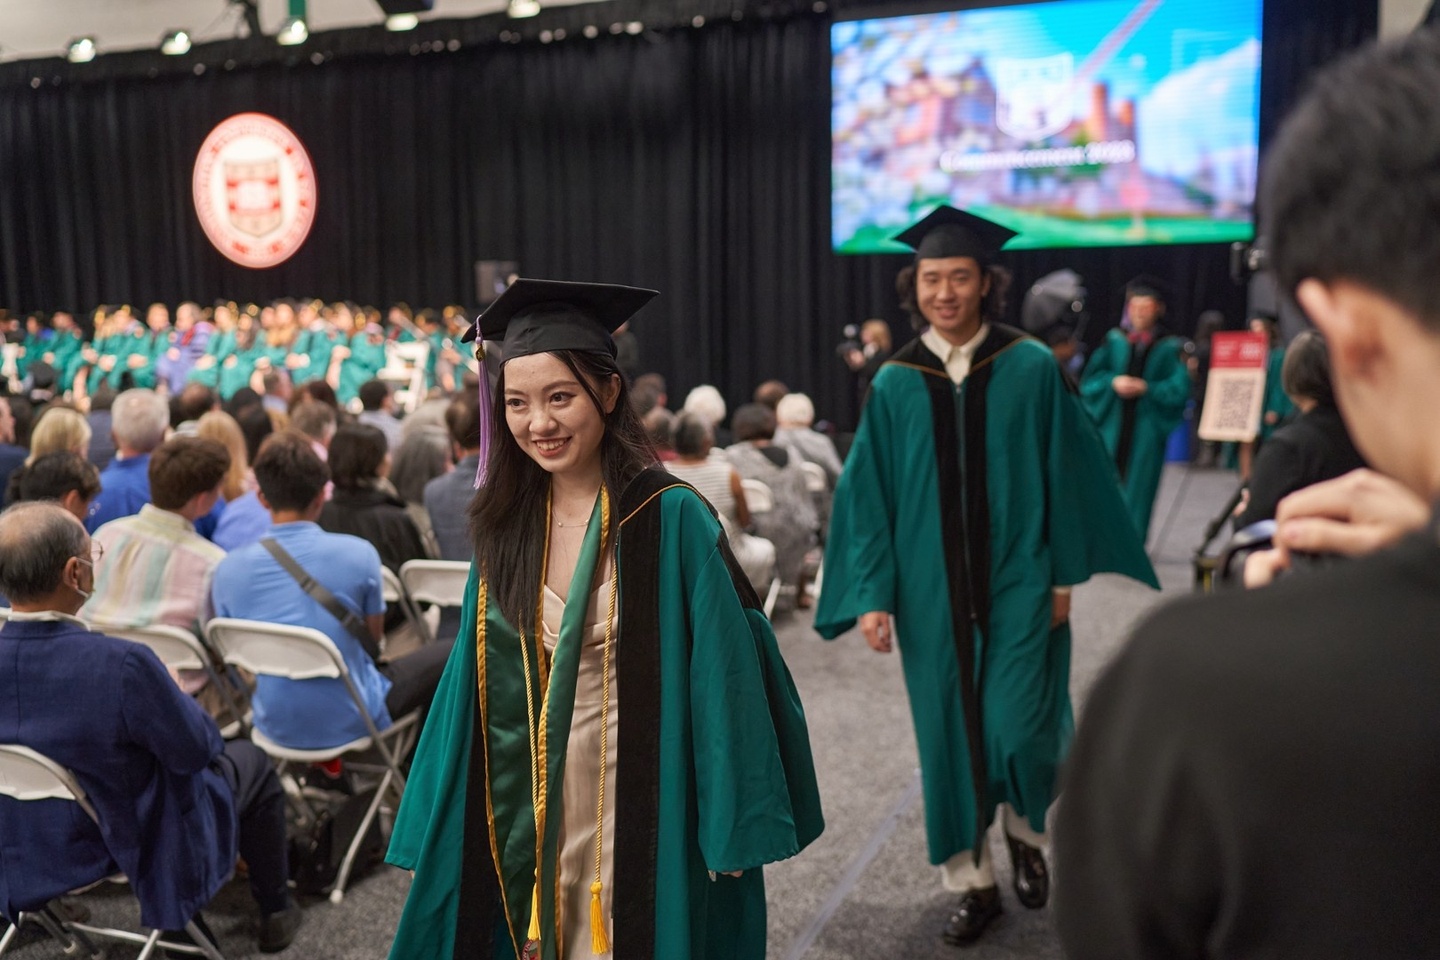 Students in green graduation robes and caps process down an aisle at the recognition ceremony.